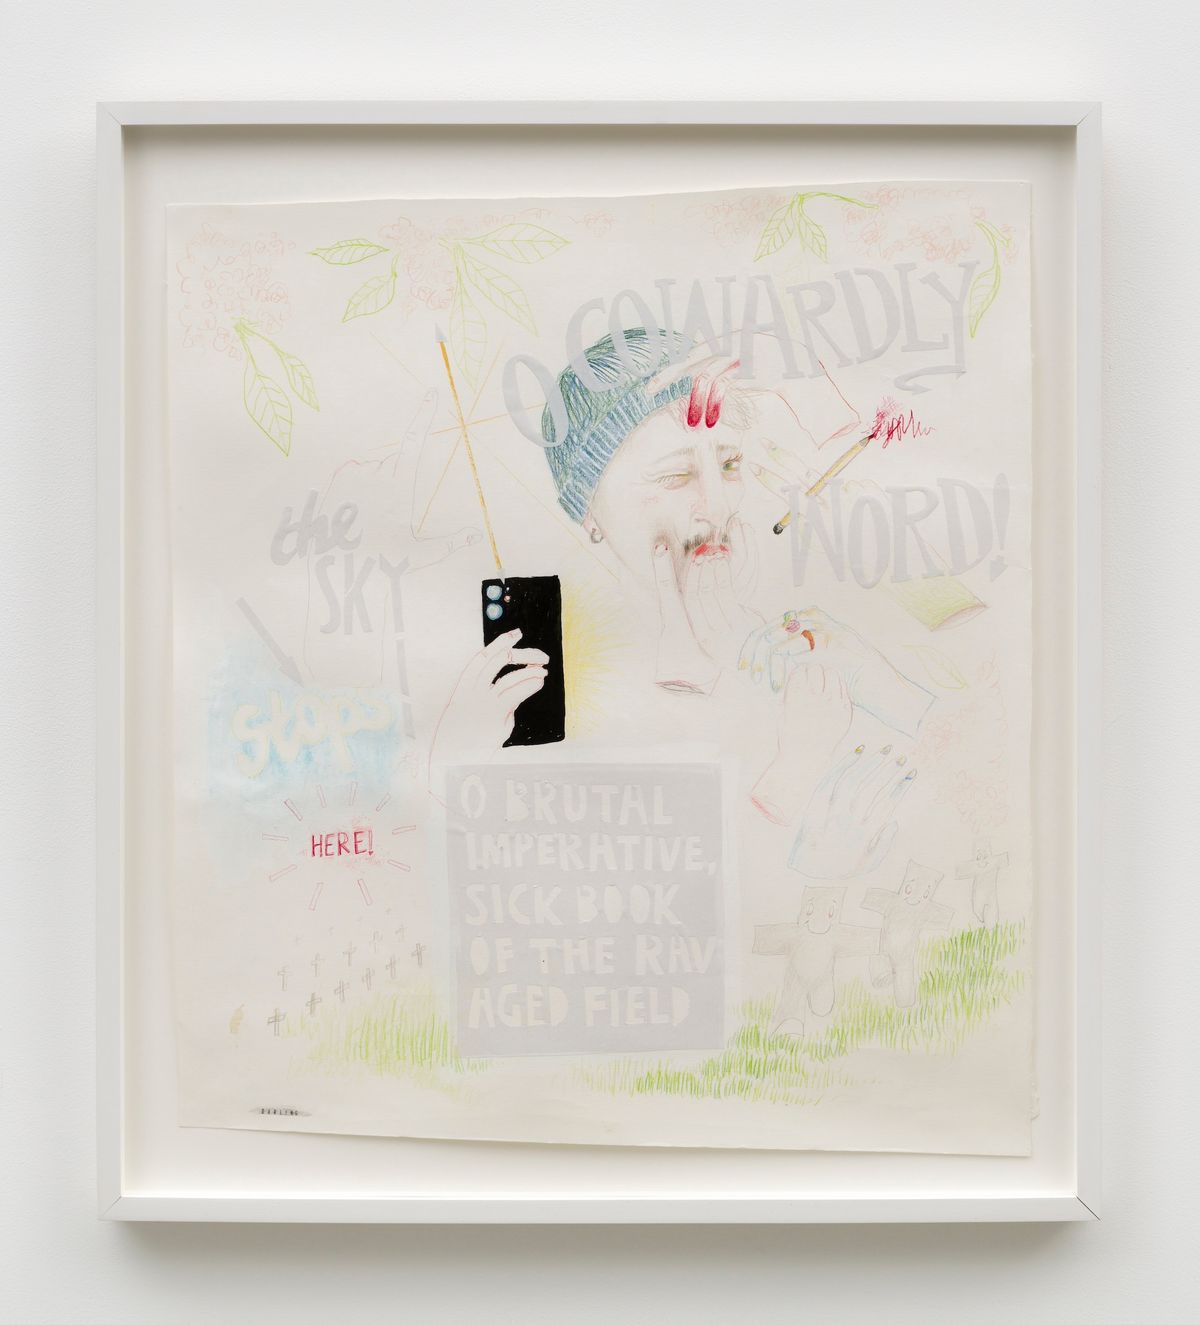 Jesse Darling, O Cowardly Word, 2022 Courtesy of the artist and Chapter NY, New York